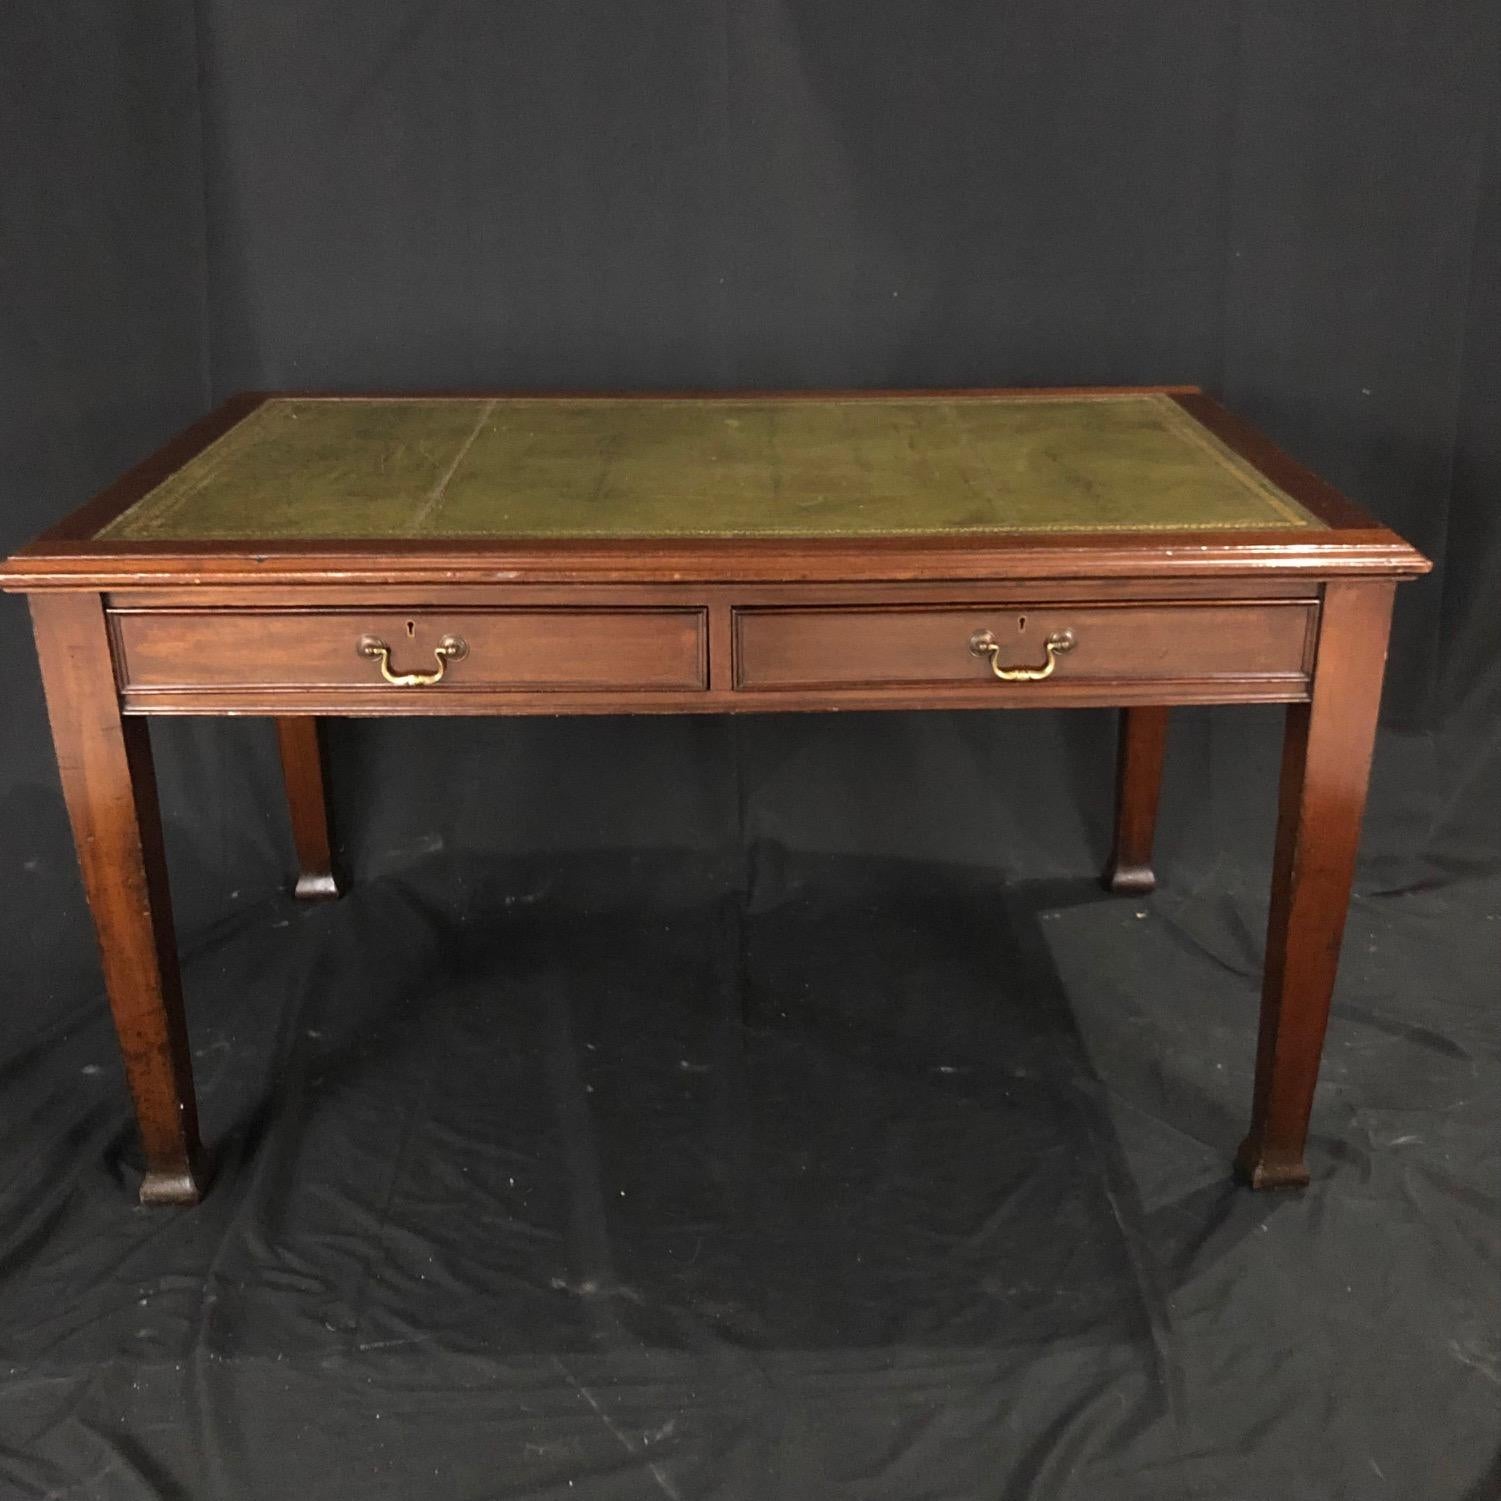 This beautiful desk has a wonderful aged patina and is quite solid, with two large dovetailed drawers. Crafted in the beginning of the 20th century, it is paneled on all sides so can stand in the center of a room as well as against a wall. The